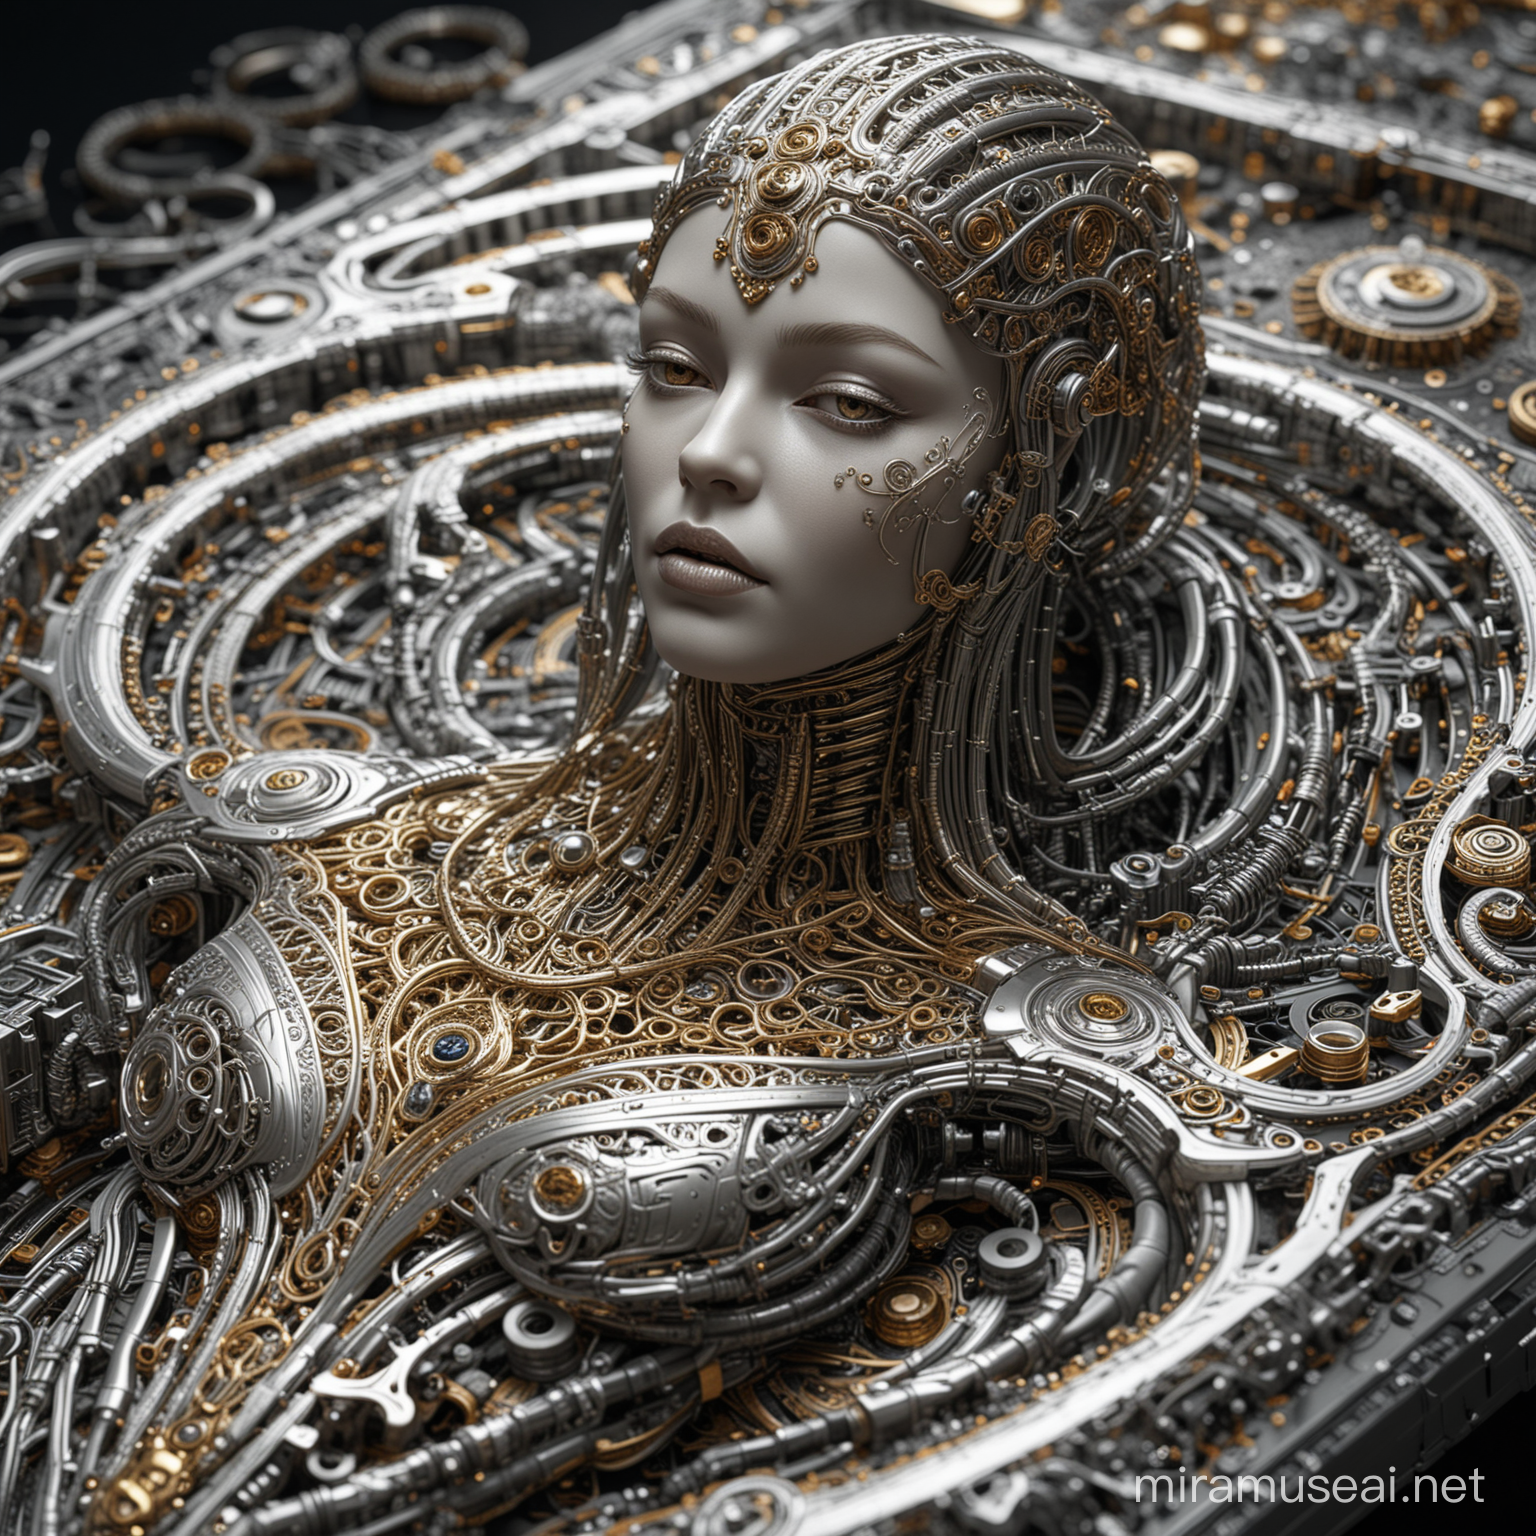 Hyperrealistic Cyborg on Filigree Table with Spare Parts